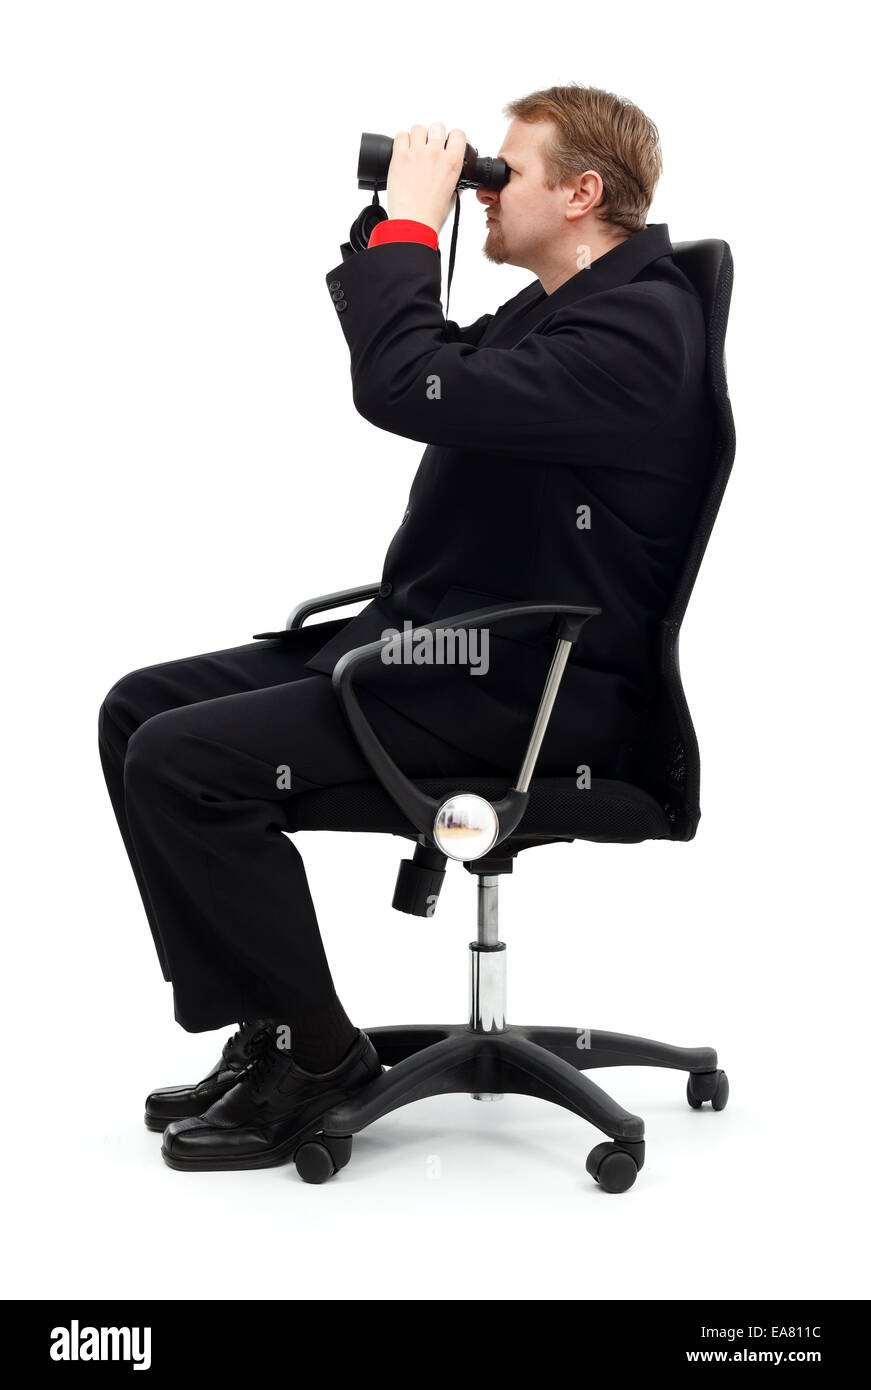 Business man sitting in chair and searching with binoculars Stock Photo